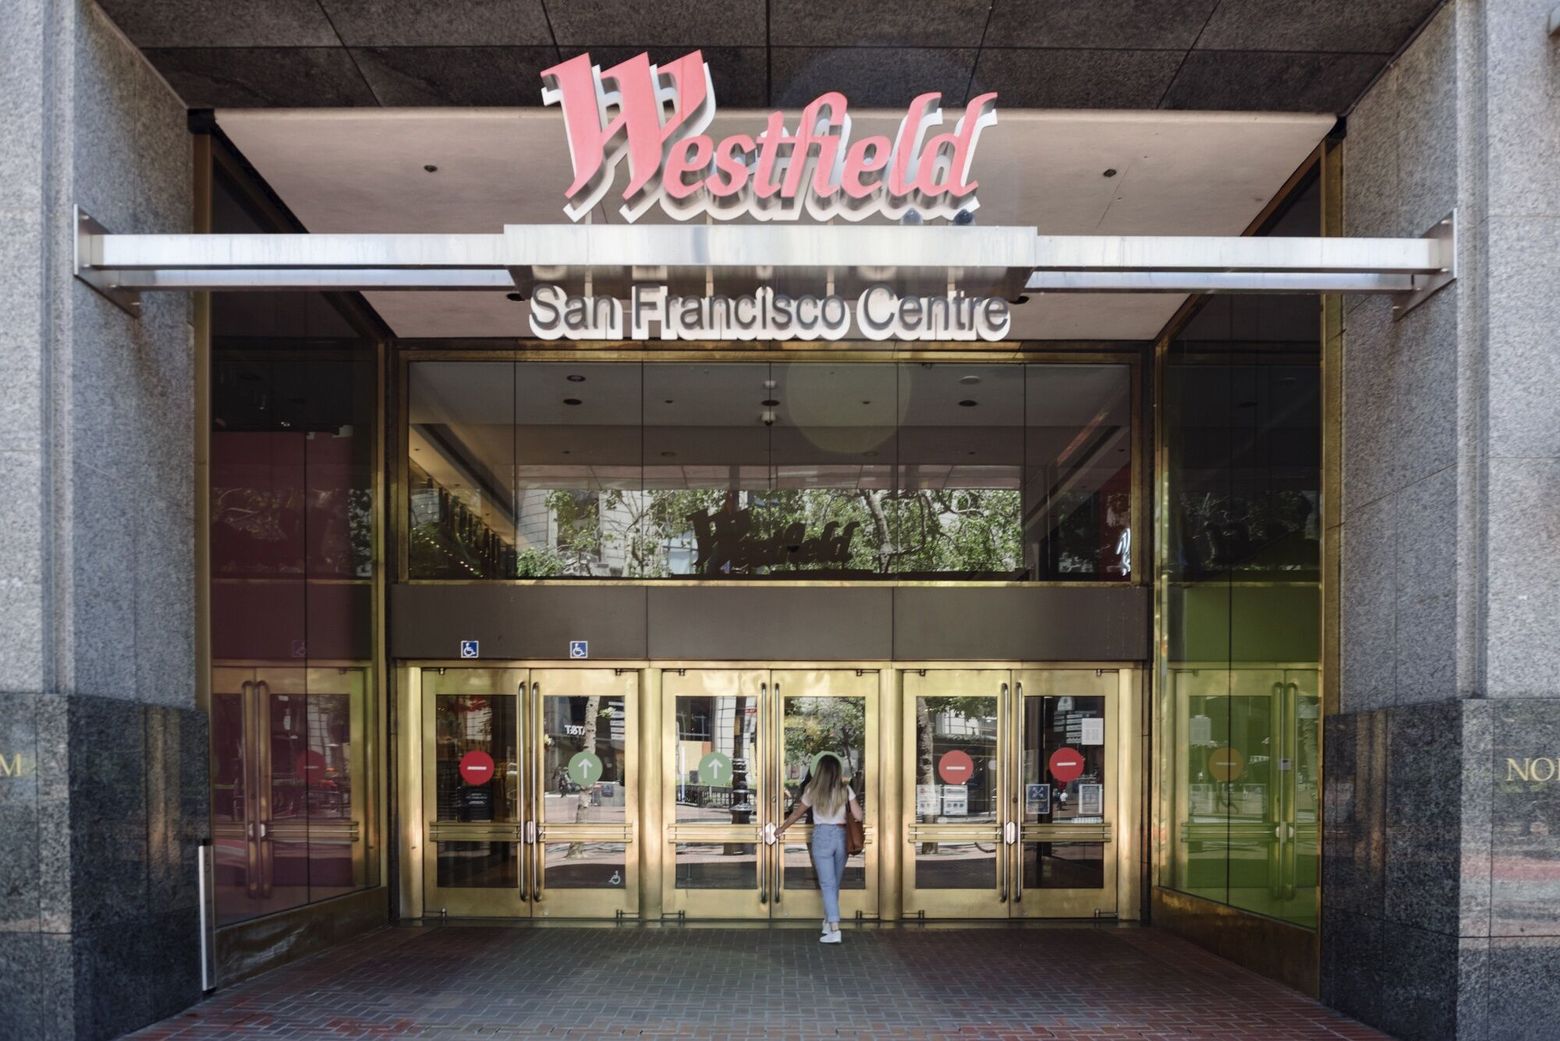 Westfield pulling out of downtown San Francisco